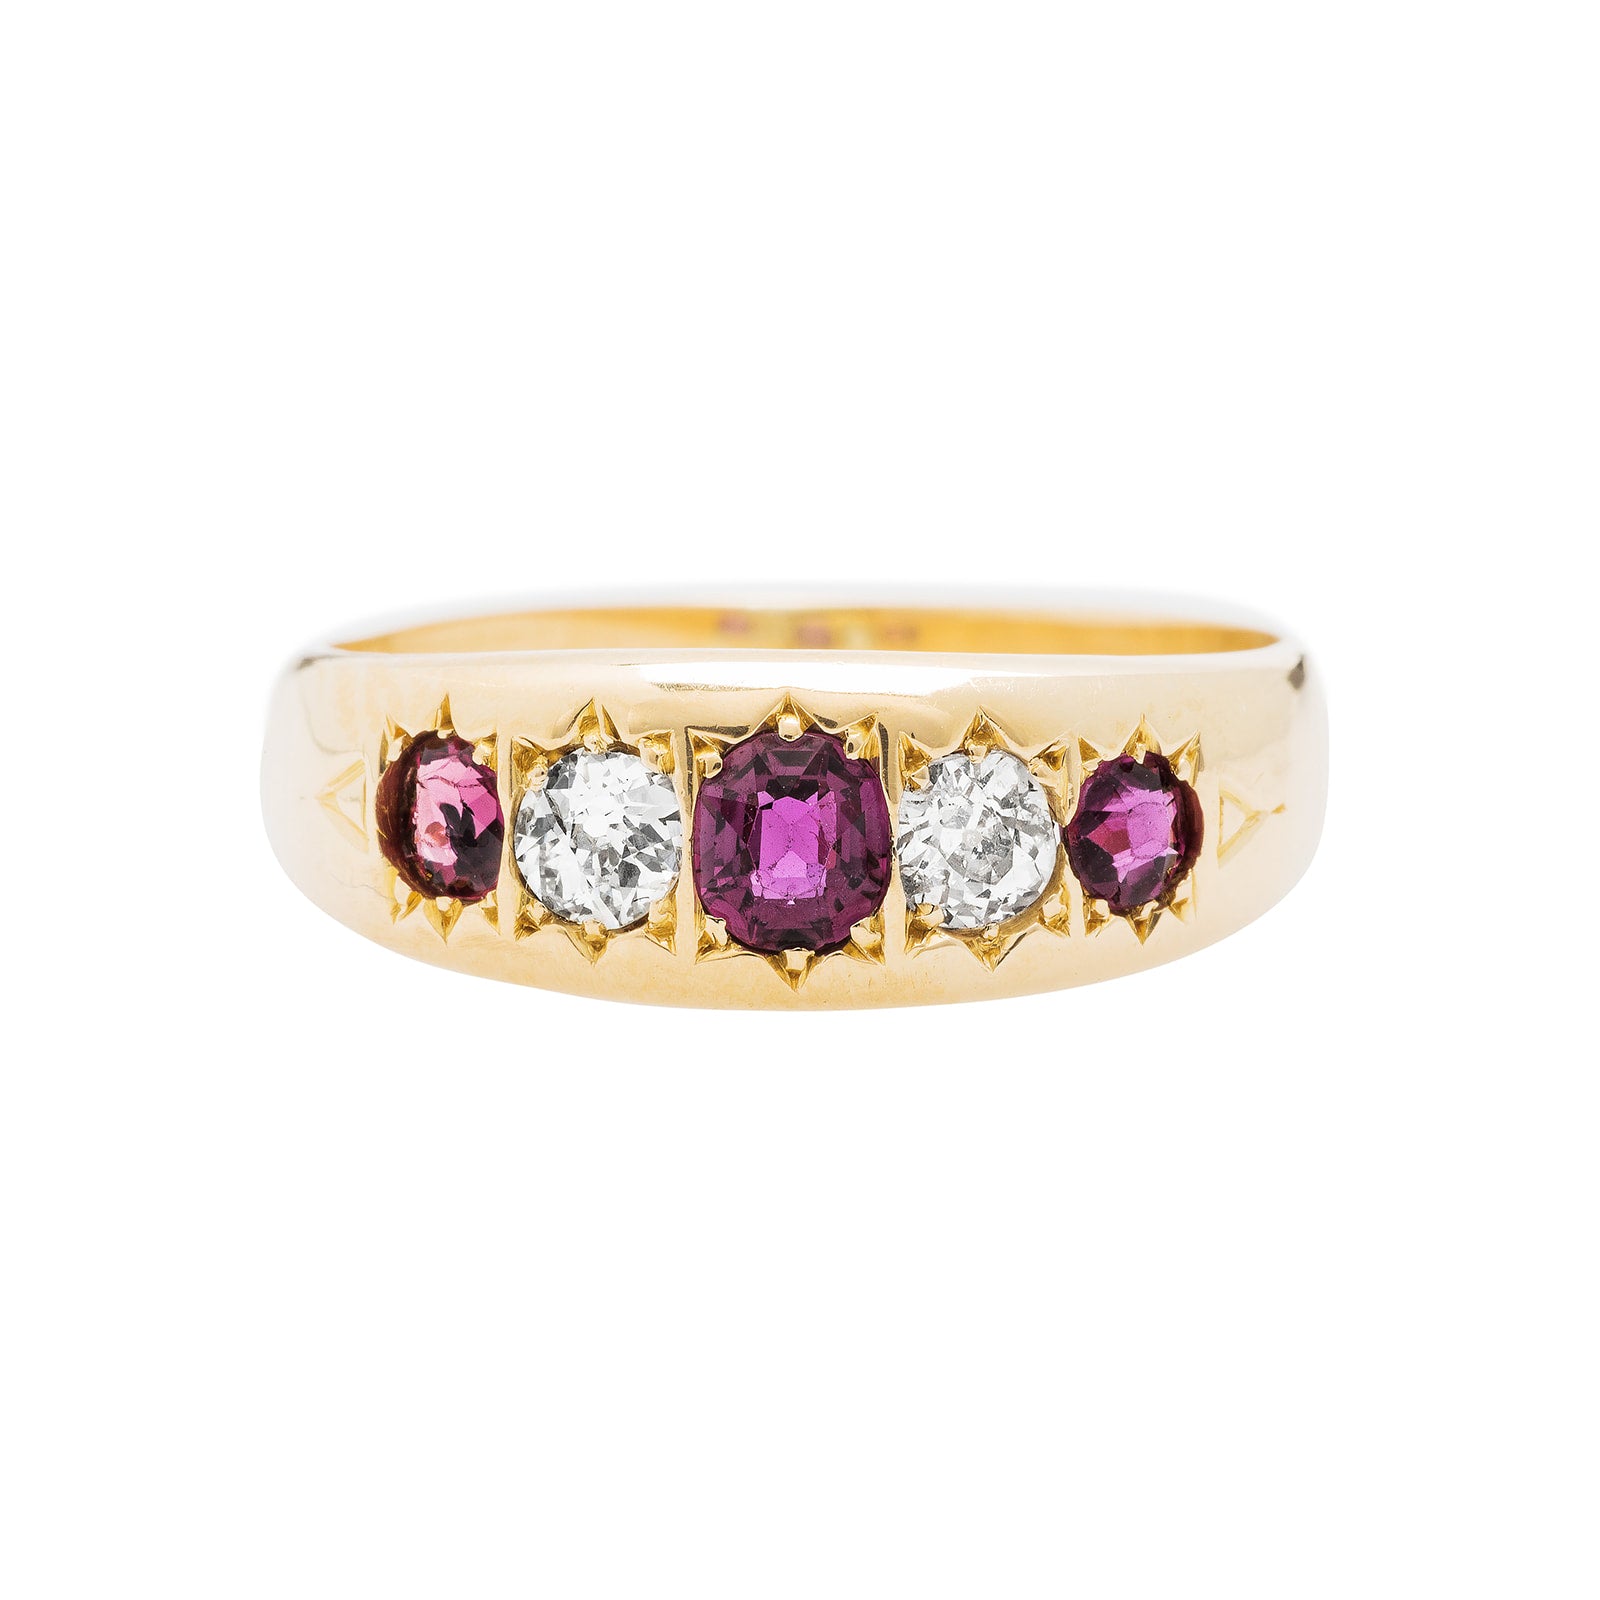 A Authentic Victorian Yellow Gold, Ruby and Diamond Gypsy Ring